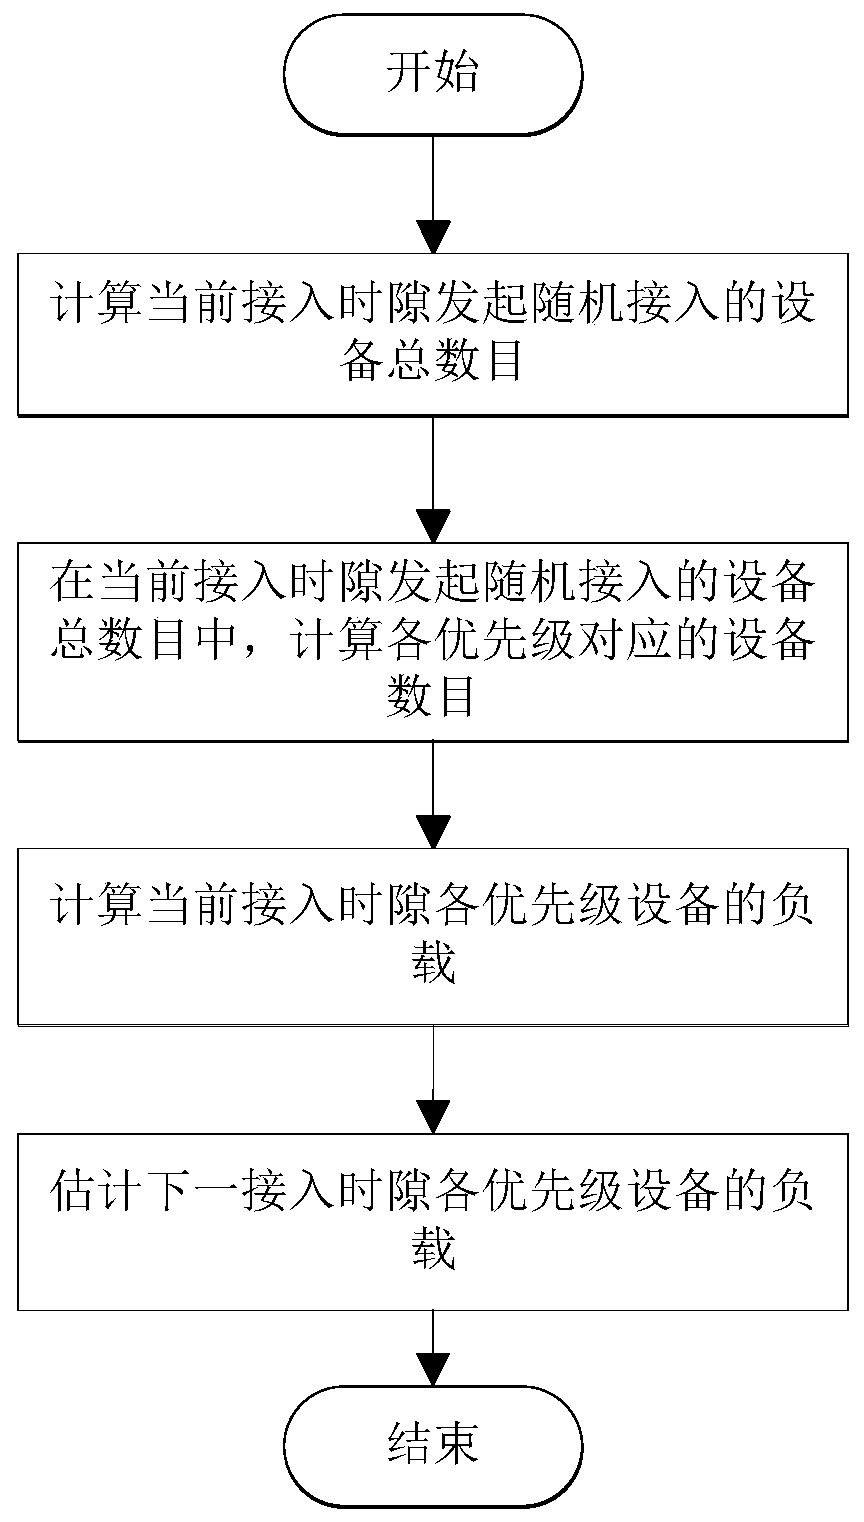 Random access congestion control method and electronic equipment